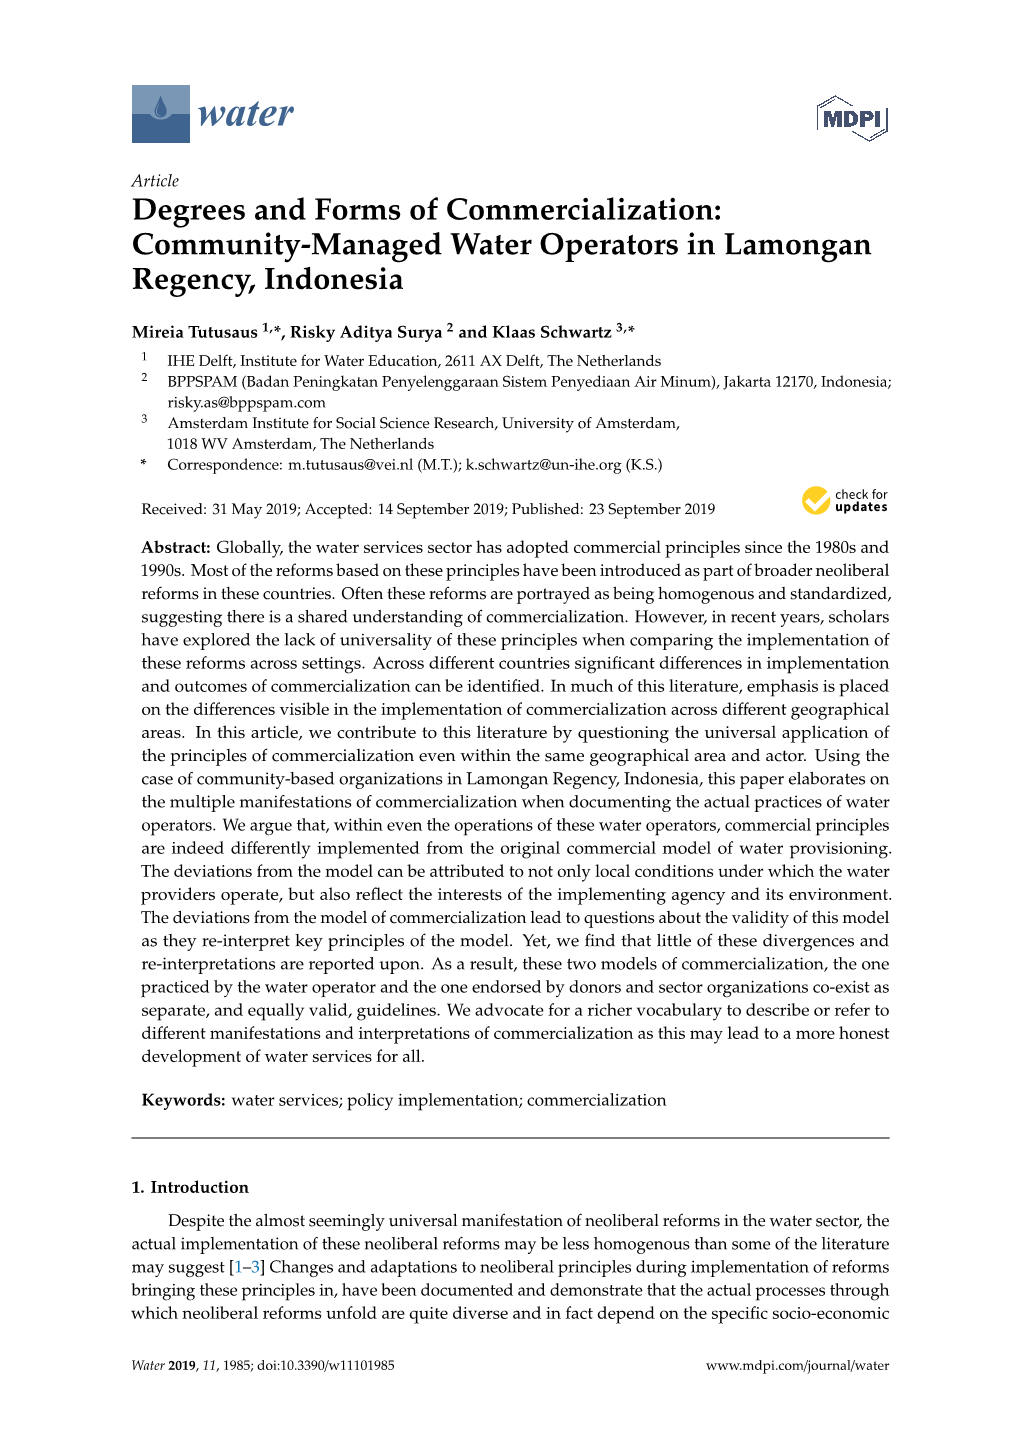 Degrees and Forms of Commercialization: Community-Managed Water Operators in Lamongan Regency, Indonesia